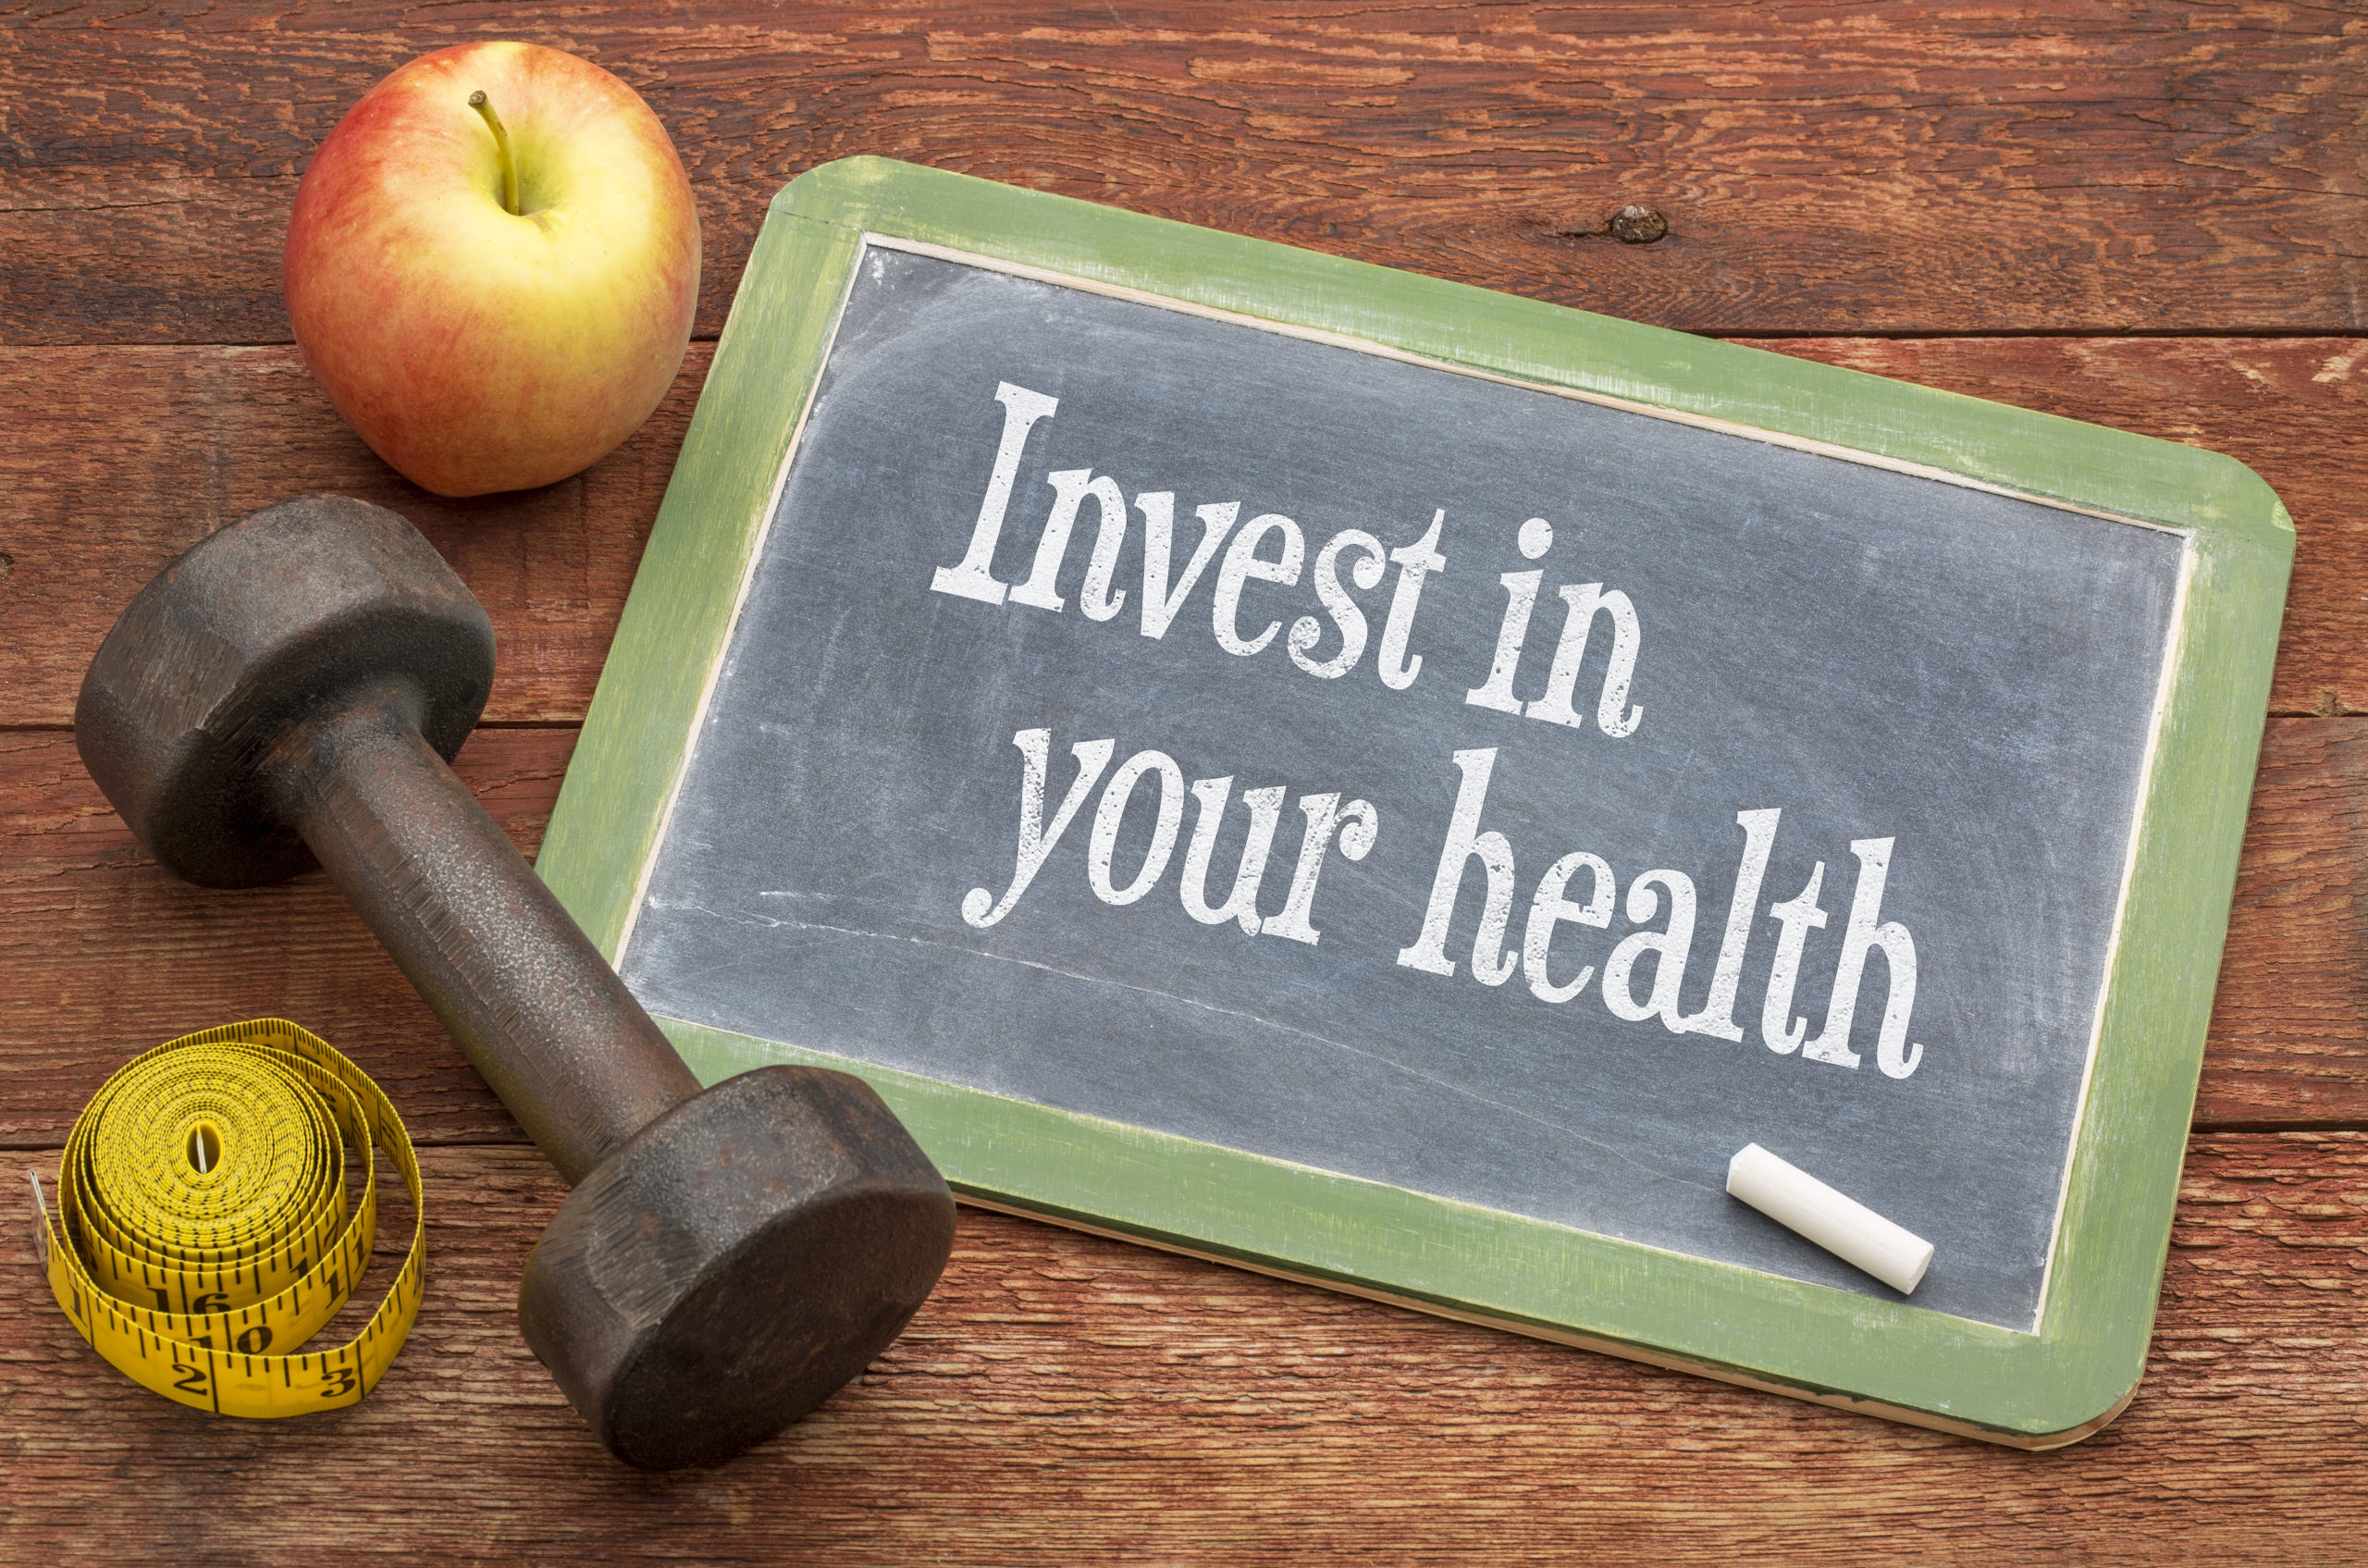 Invest,In,Your,Health,-,Slate,Blackboard,Sign,Against,Weathered